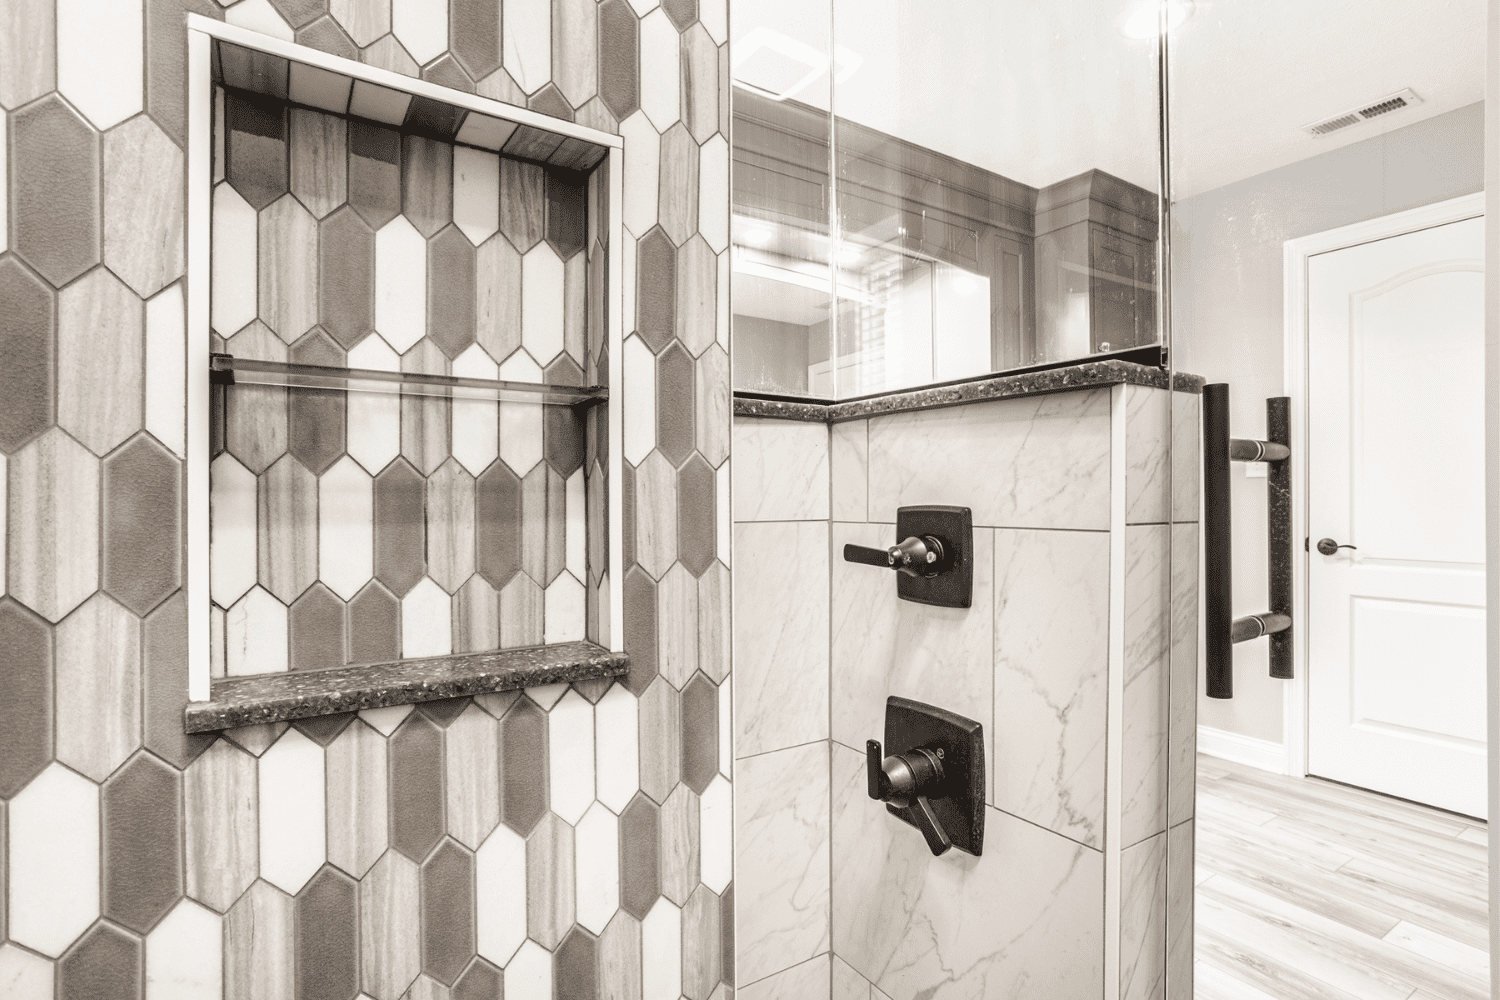 Nicholas Design Build | A black and white photo of a bathroom with tiled walls.